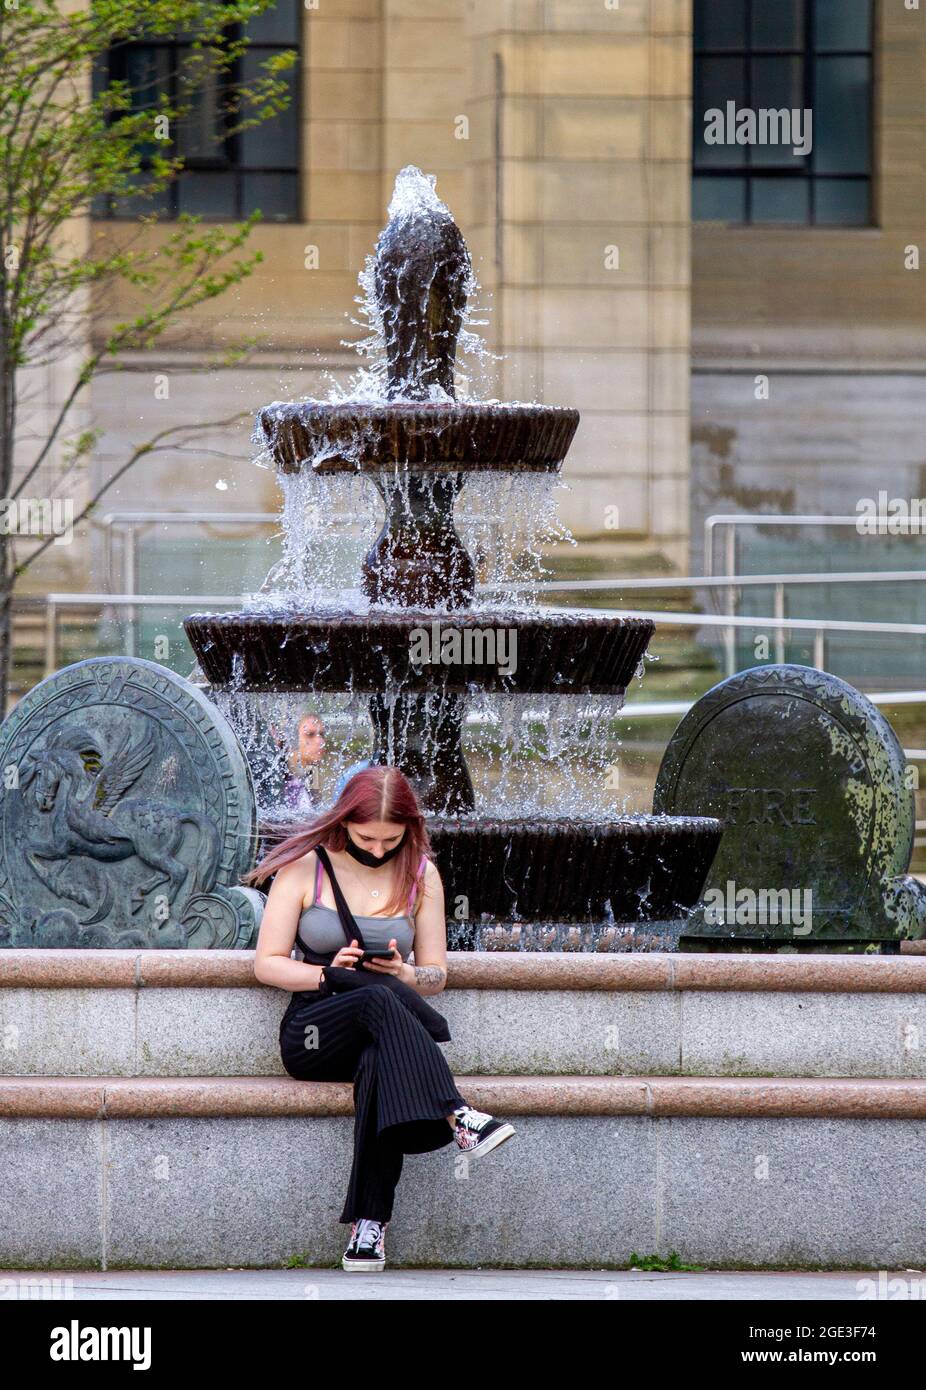 Dundee, Tayside, Scotland, UK. 16th Aug, 2021. UK Weather: A warm sunny day with a slight cool breeze across North East Scotland with temperatures reaching 20°C. A young woman wearing a facemask sitting at the Caird Hall fountains enjoying the warm sunshine whilst text messaging on her mobile phone in Dundee city centre. Credit: Dundee Photographics/Alamy Live News Stock Photo